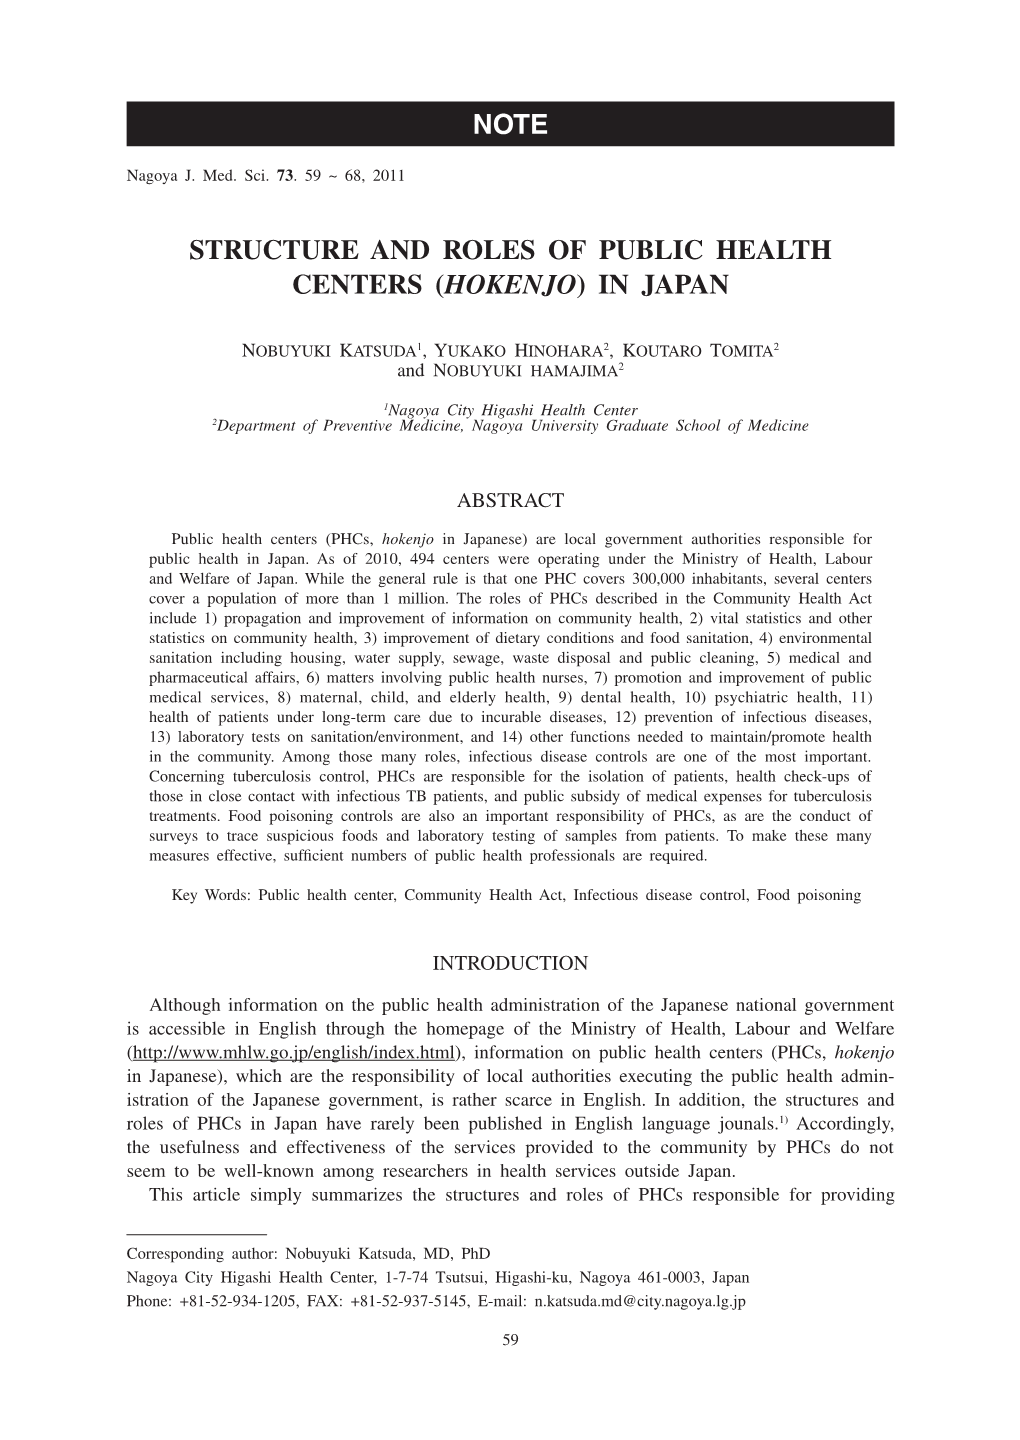 Structure and Roles of Public Health Centers (Hokenjo) in Japan